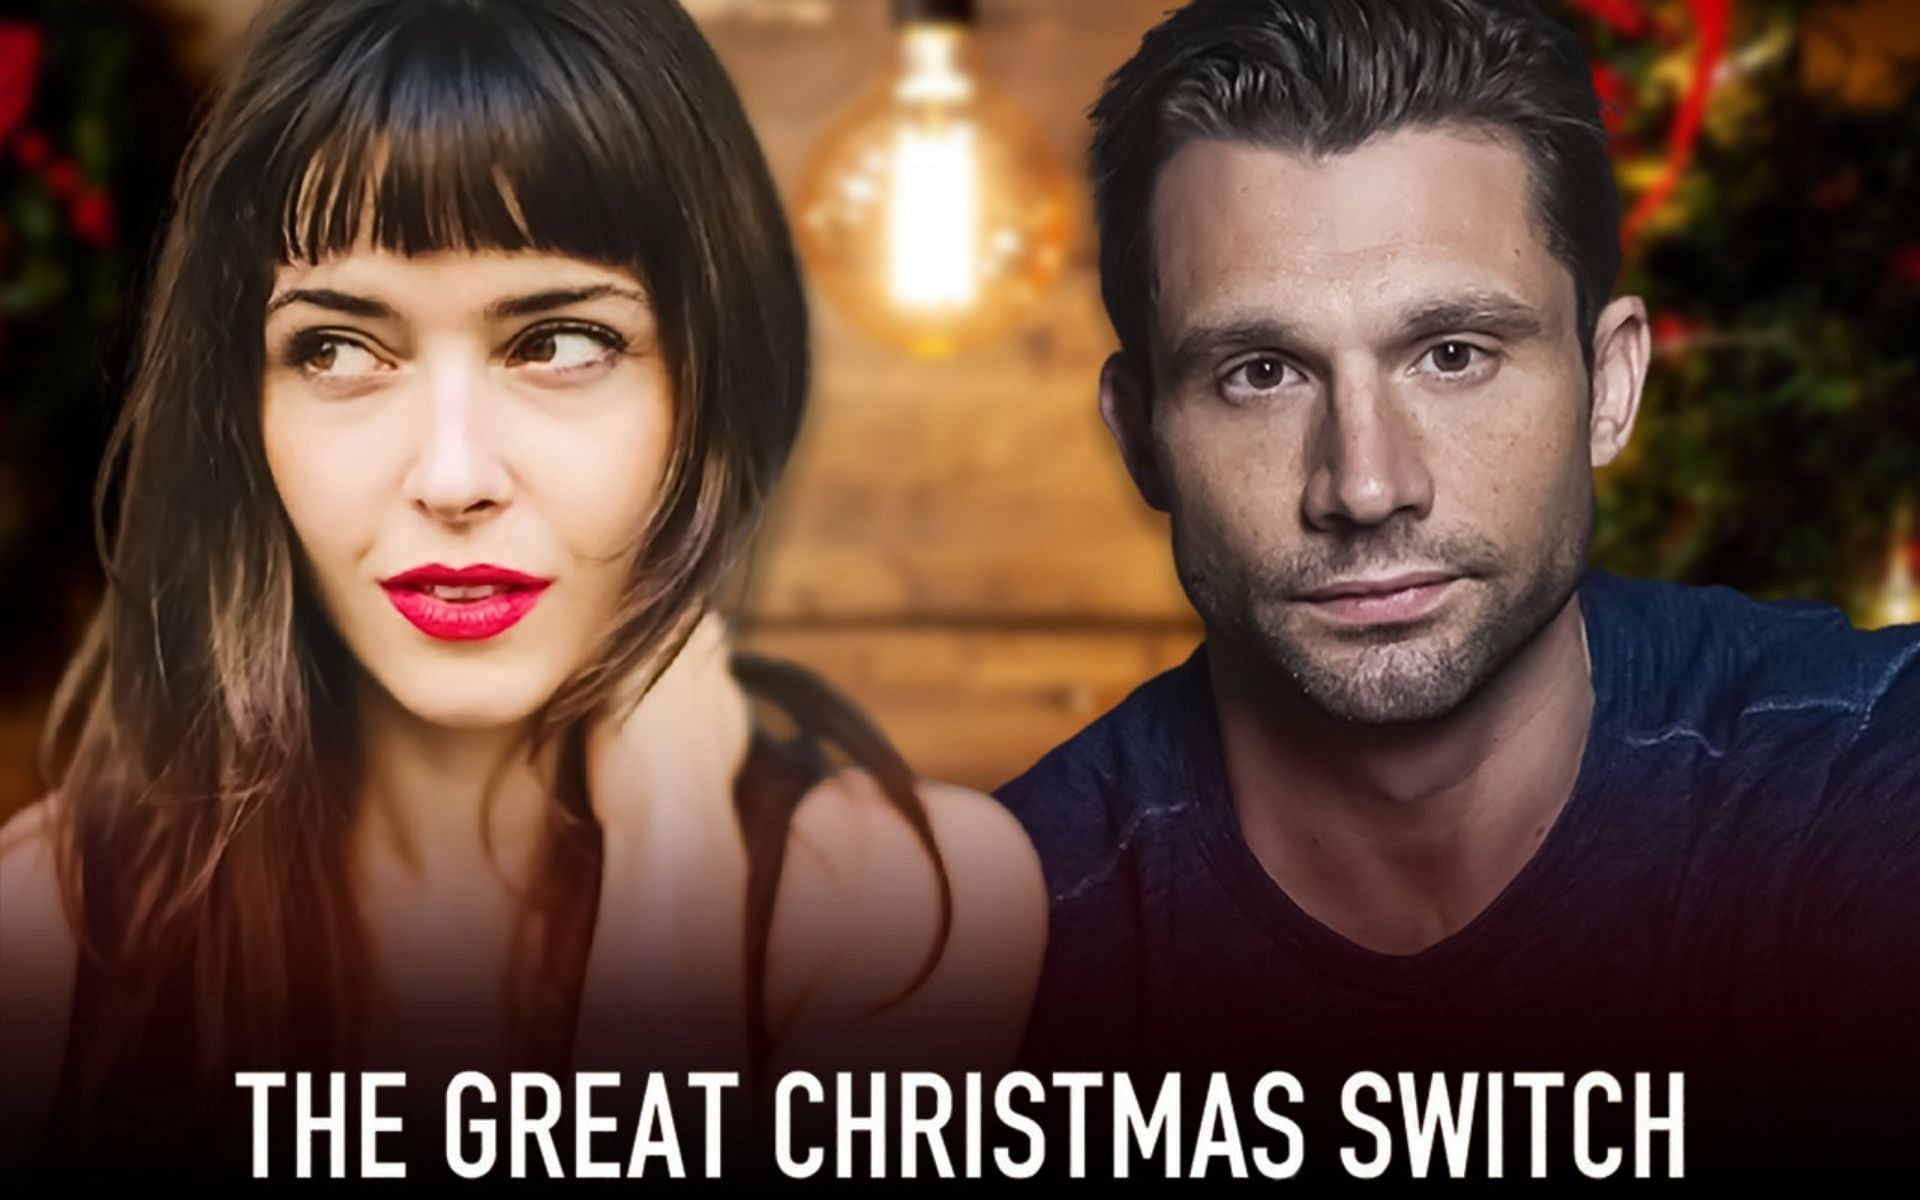 Meet the cast of &#039;The Great Christmas Switch&#039; (Image via Sportskeeda)